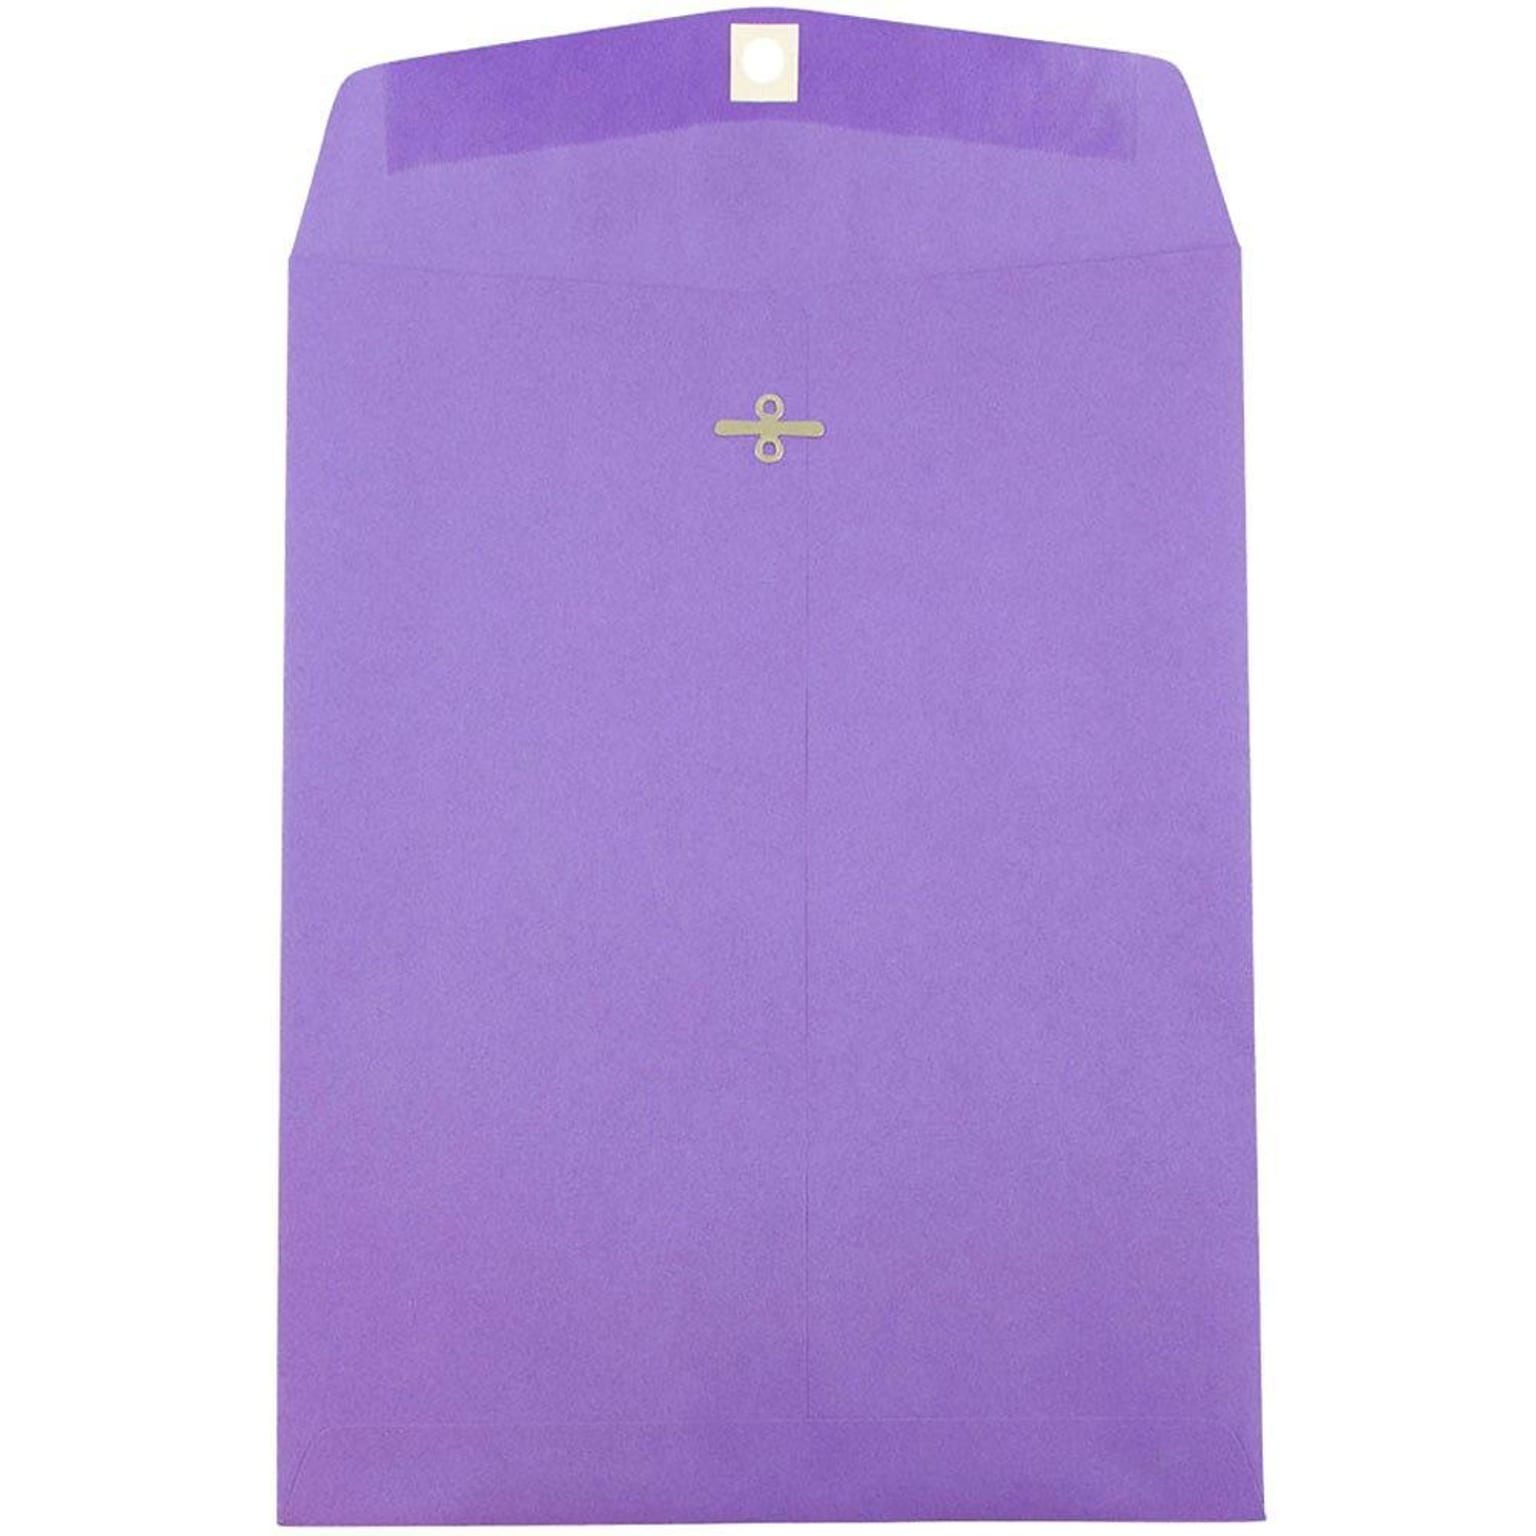 JAM Paper 9 x 12 Open End Catalog Colored Envelopes with Clasp Closure, Violet Purple Recycled, 10/Pack (900906767B)